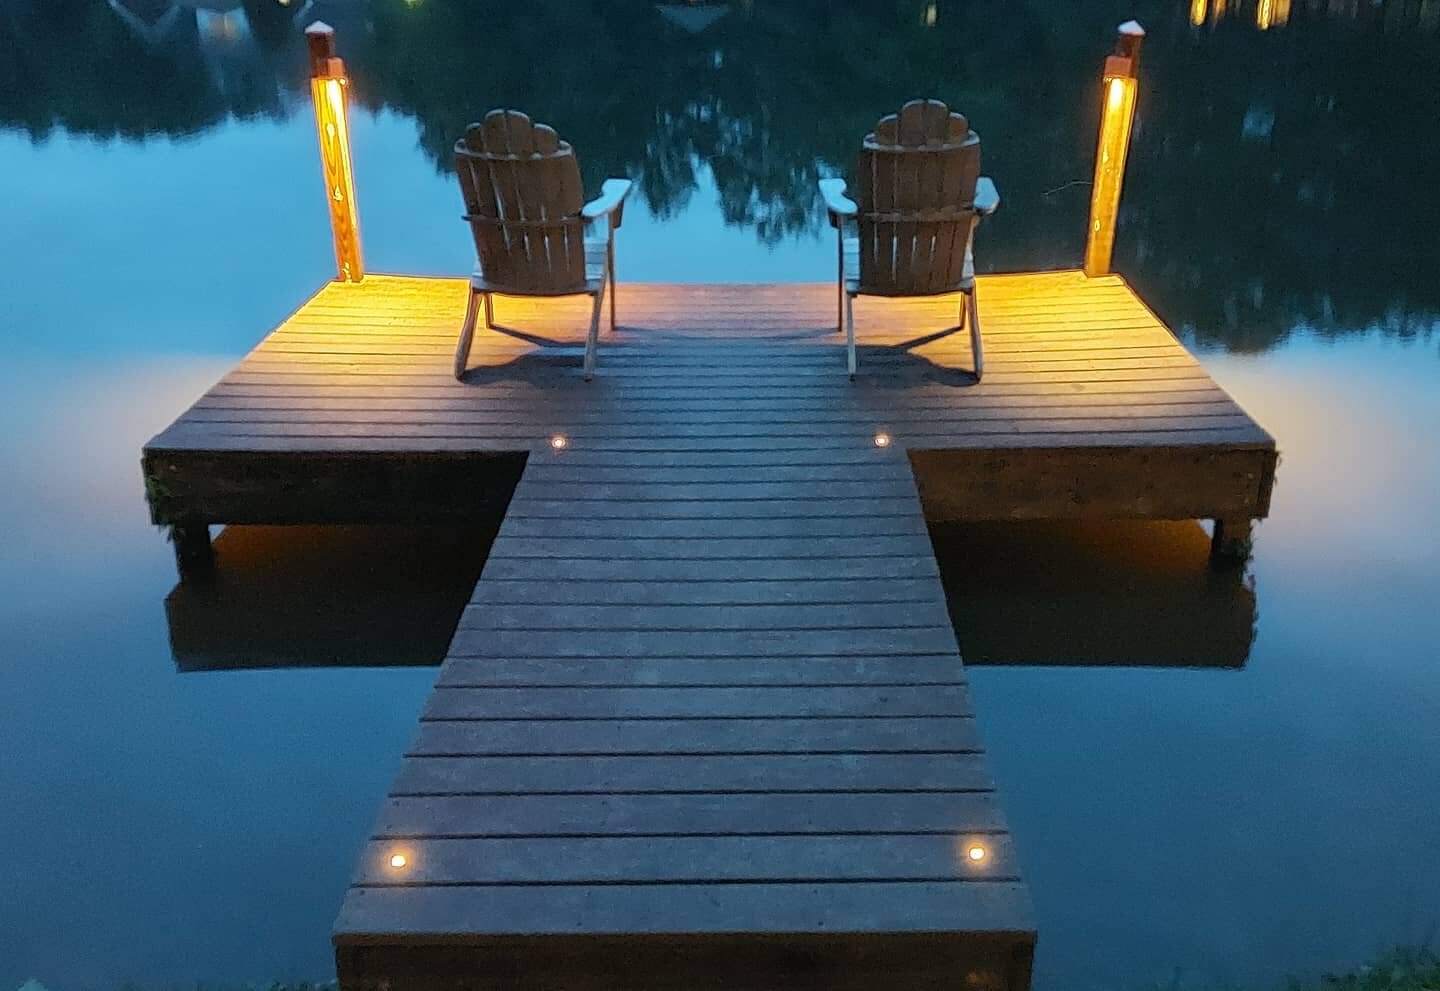 Add a little Glow to your evenings on the water! Loving this cozy dock with just a touch of light for ambiance and safety. Perfect setting to unwind at the end of a long Monday - just bring your favorite beverage and your best friend ✨ Don't wait unt